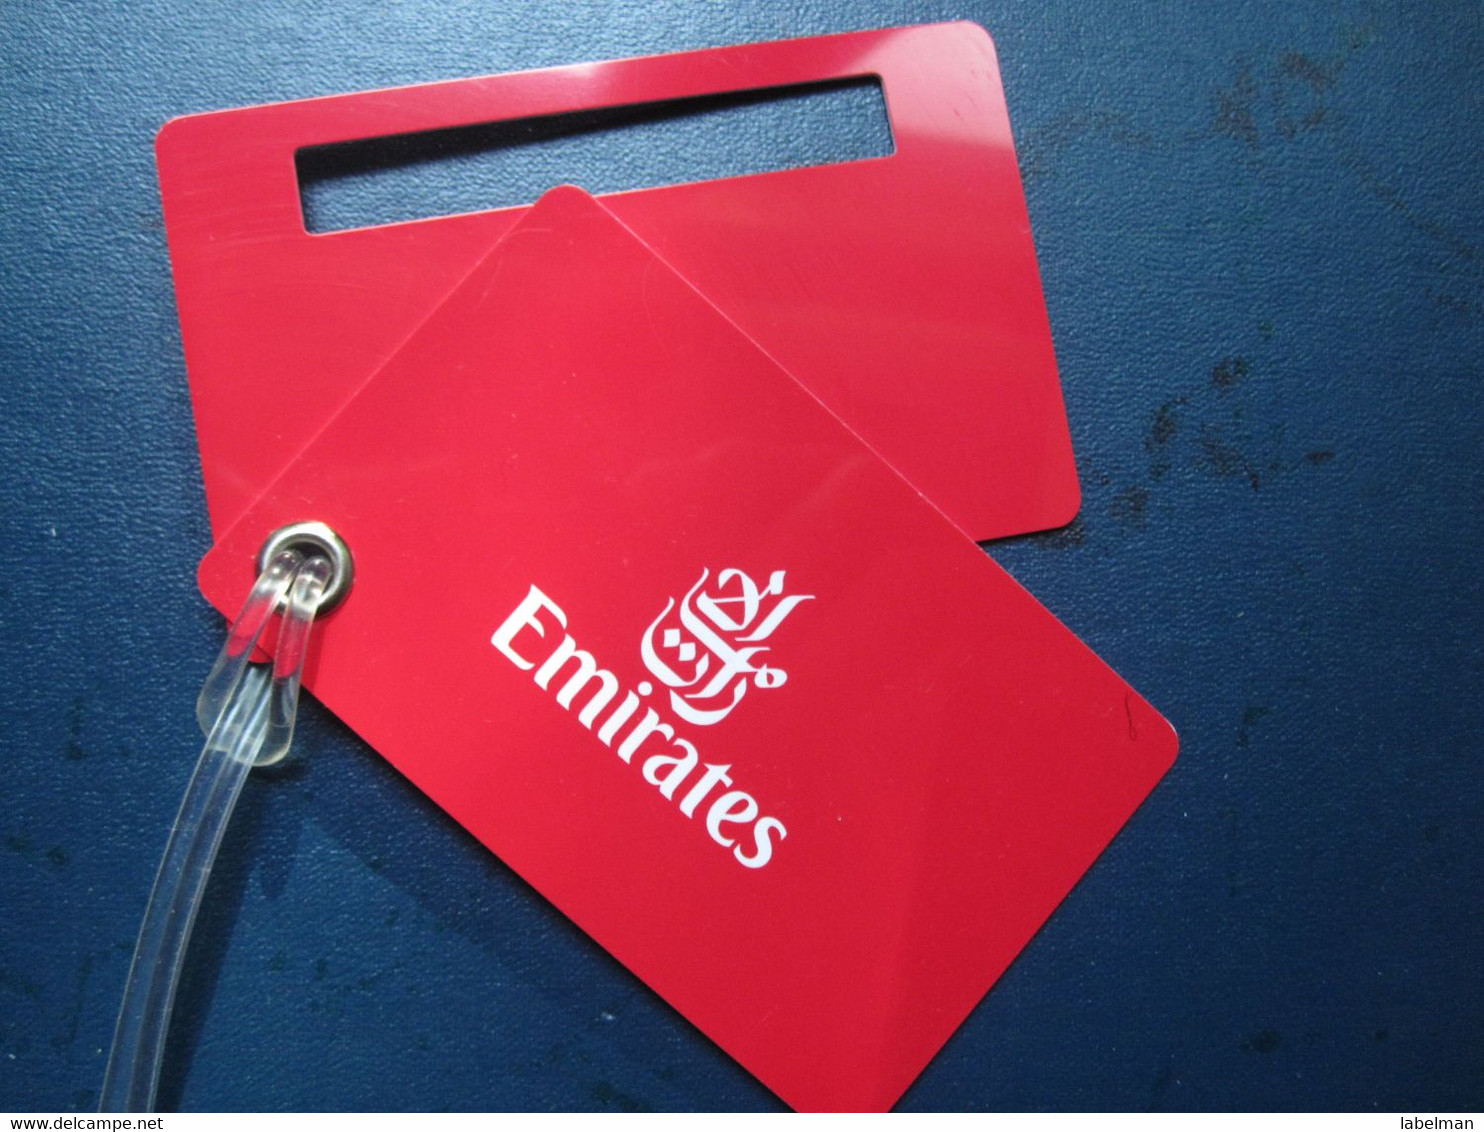 EMIRATES UAE UNITED ARABS CARD WELCOME TICKET AIRWAYS AIRLINE STICKER LABEL TAG LUGGAGE BUGGAGE PLANE AIRCRAFT AIRPORT - Monde